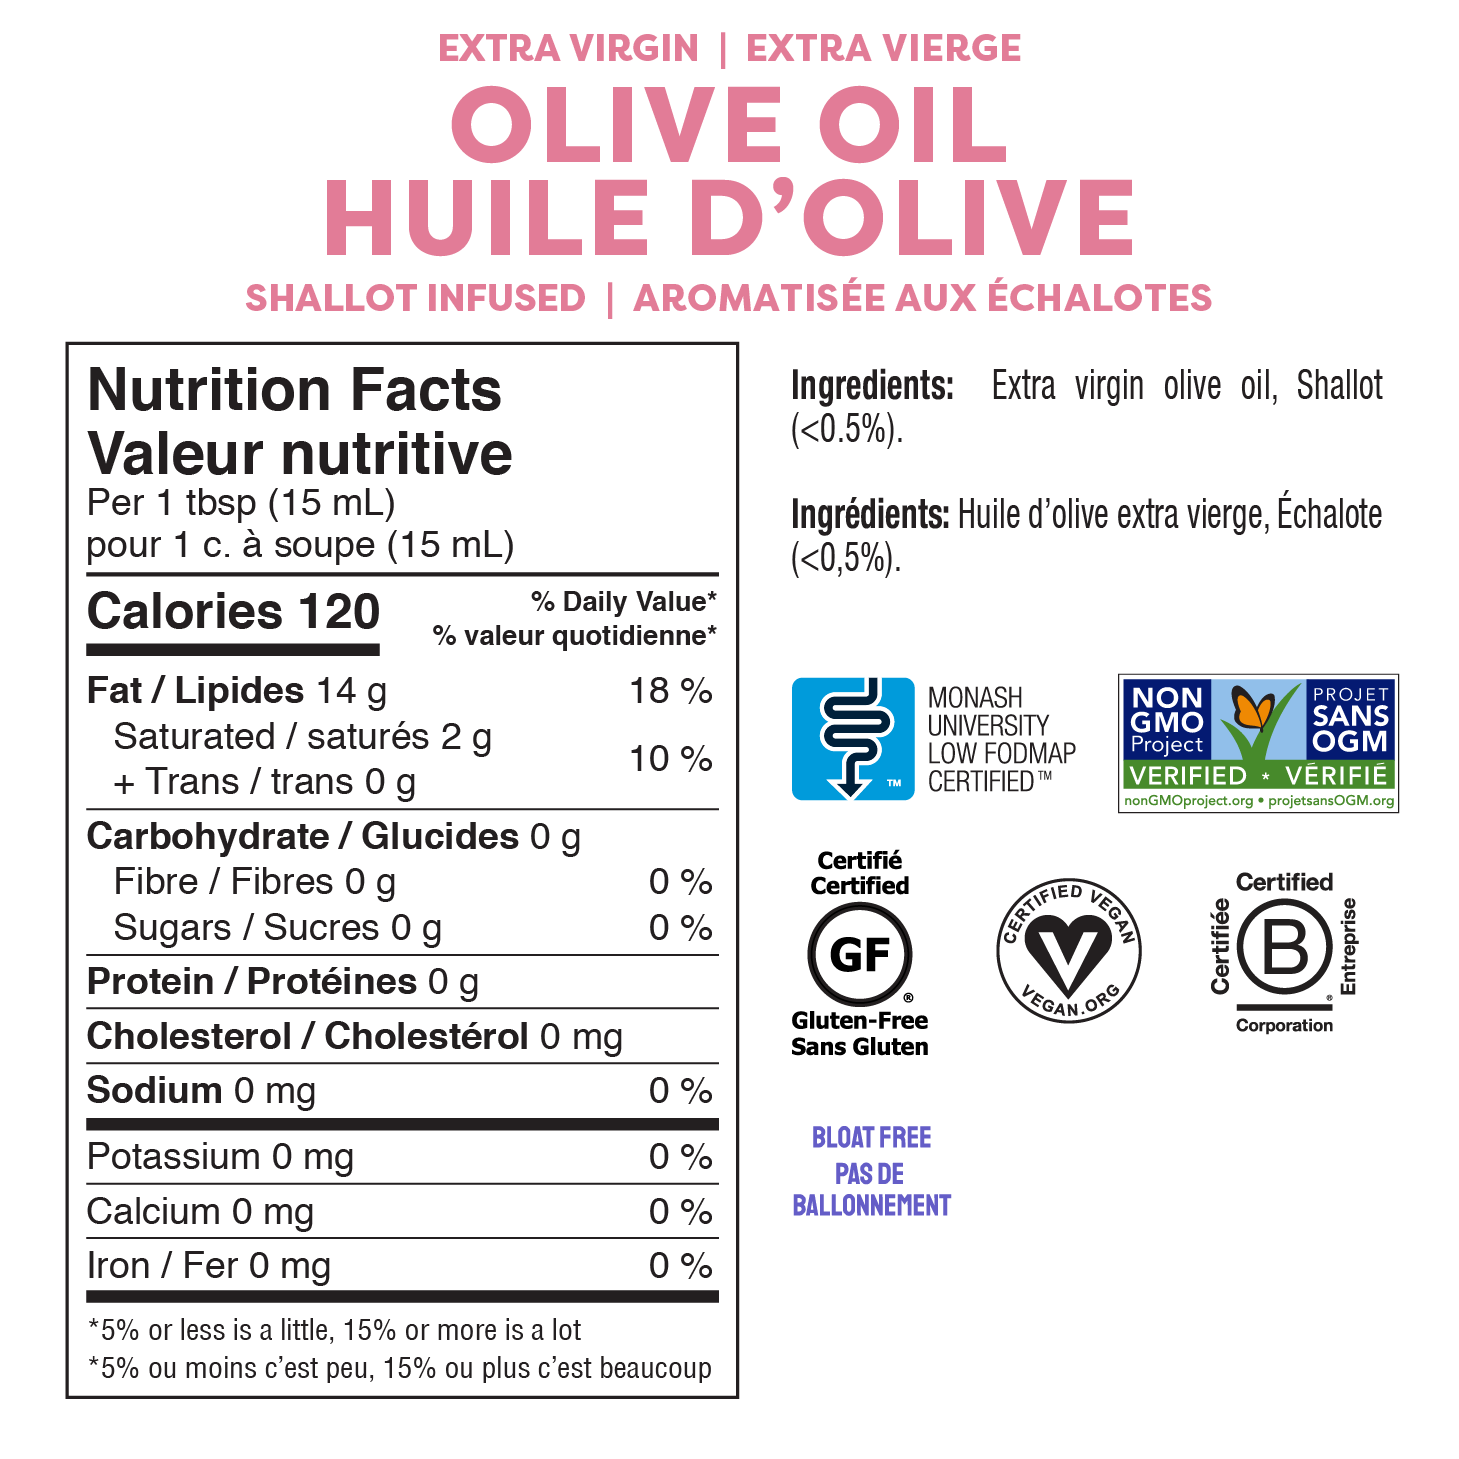 Shallot-Infused Olive Oil